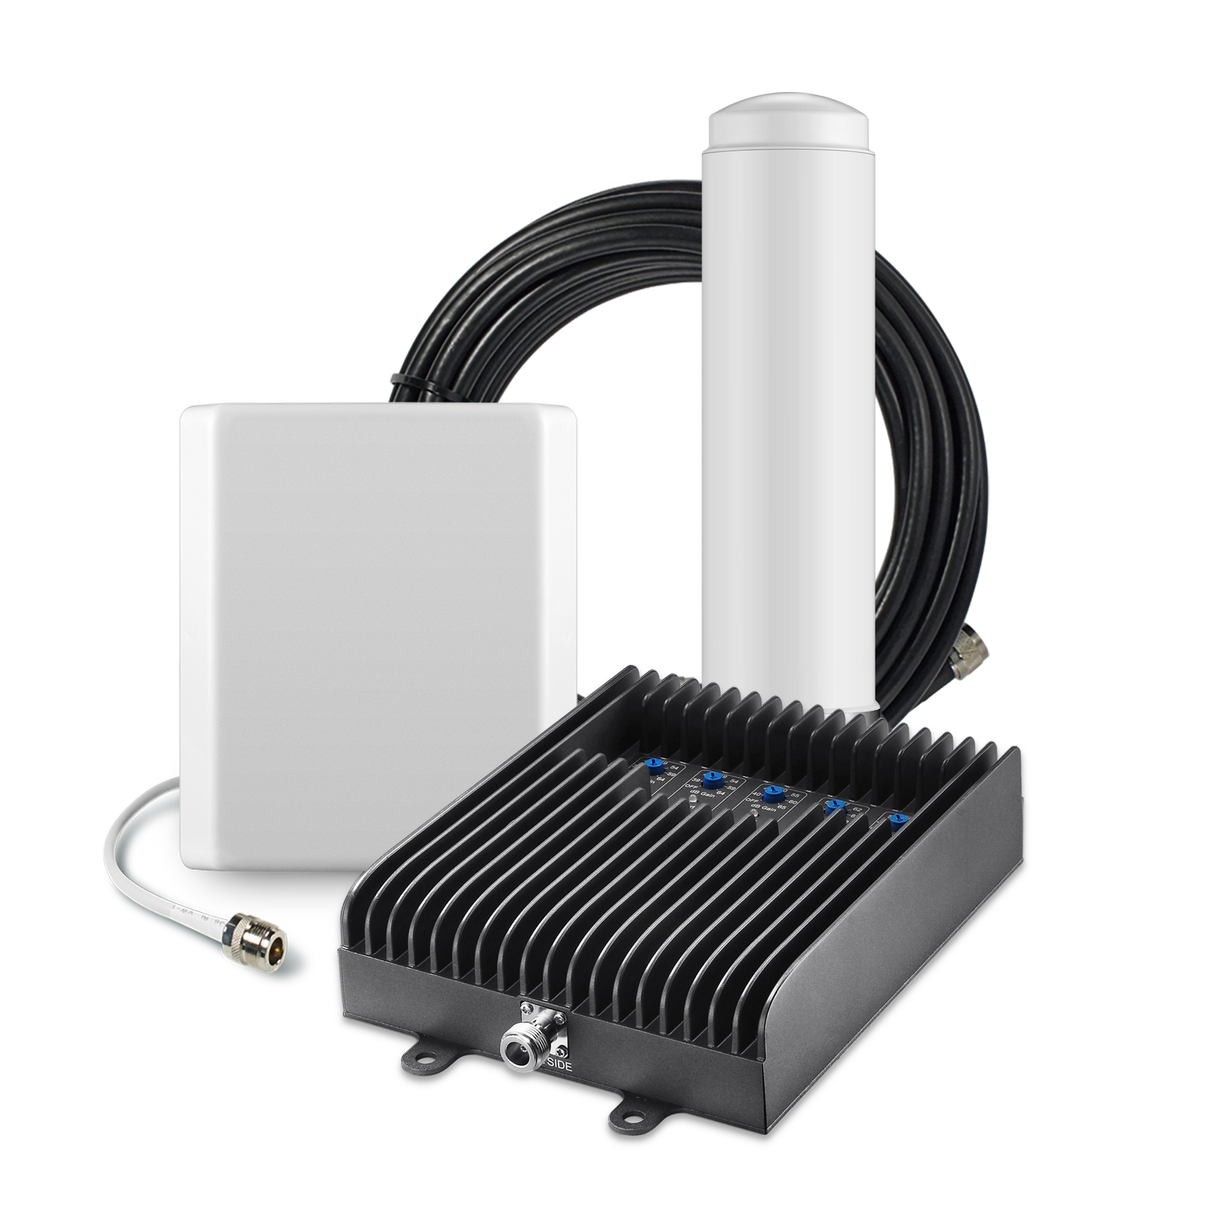 SureCall Fusion5s 72dB Signal Booster Kit - Voice, 3G & 4G LTE - Omni and Panel Kit